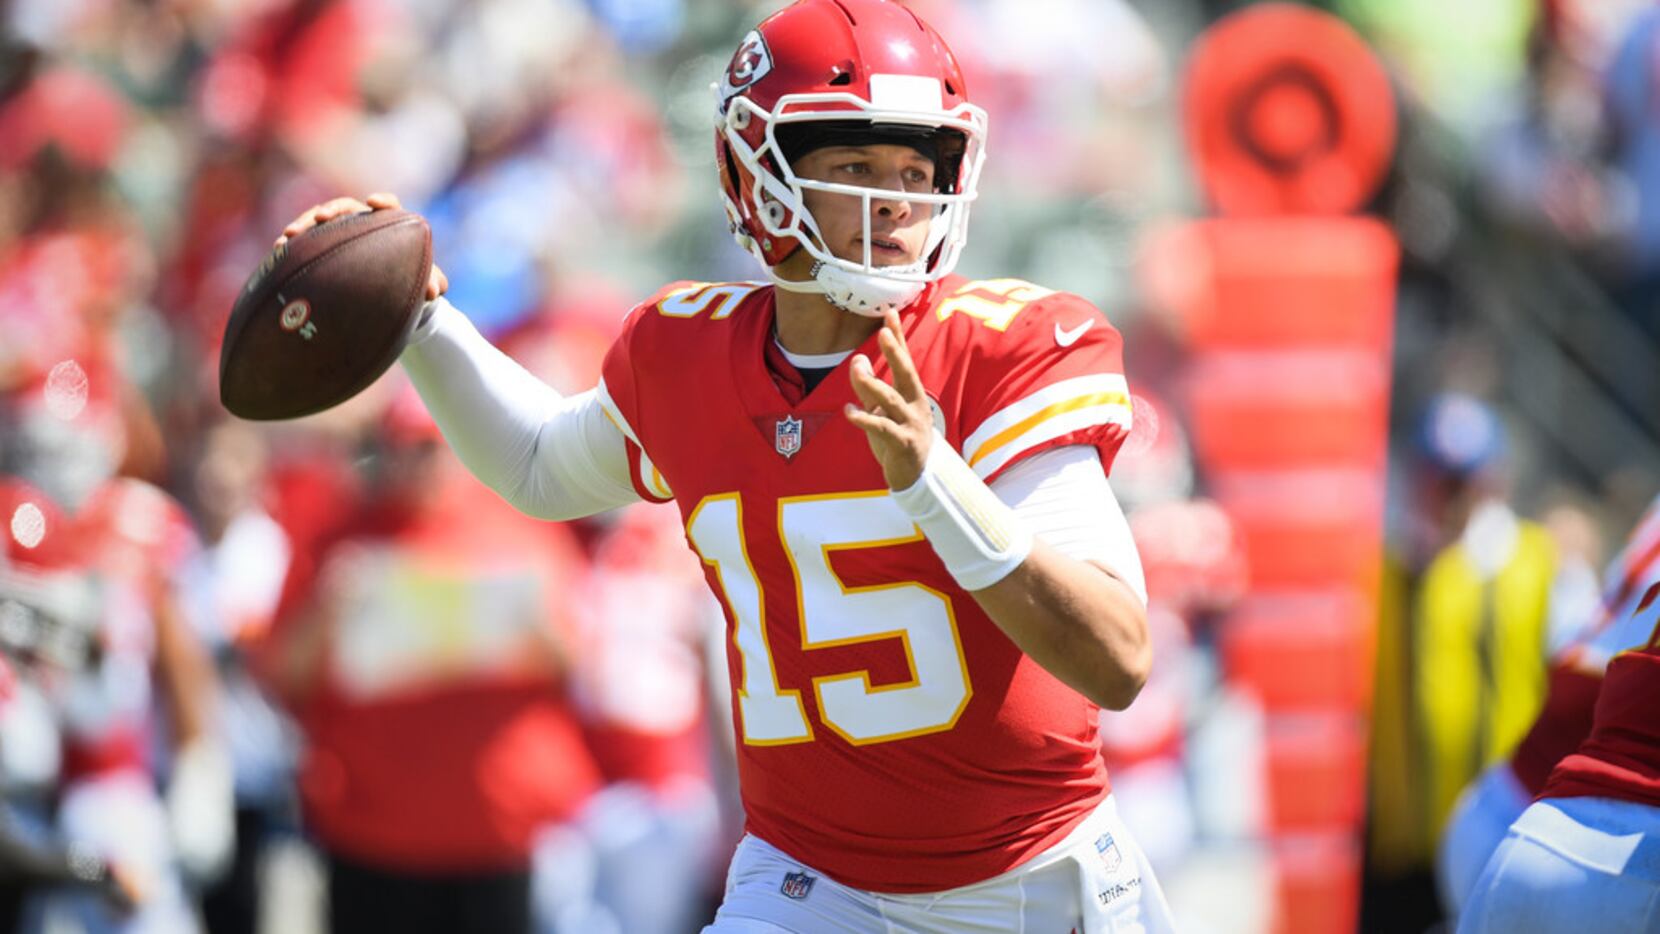 Former Texas Tech star Patrick Mahomes lands on cover of Madden NFL 20